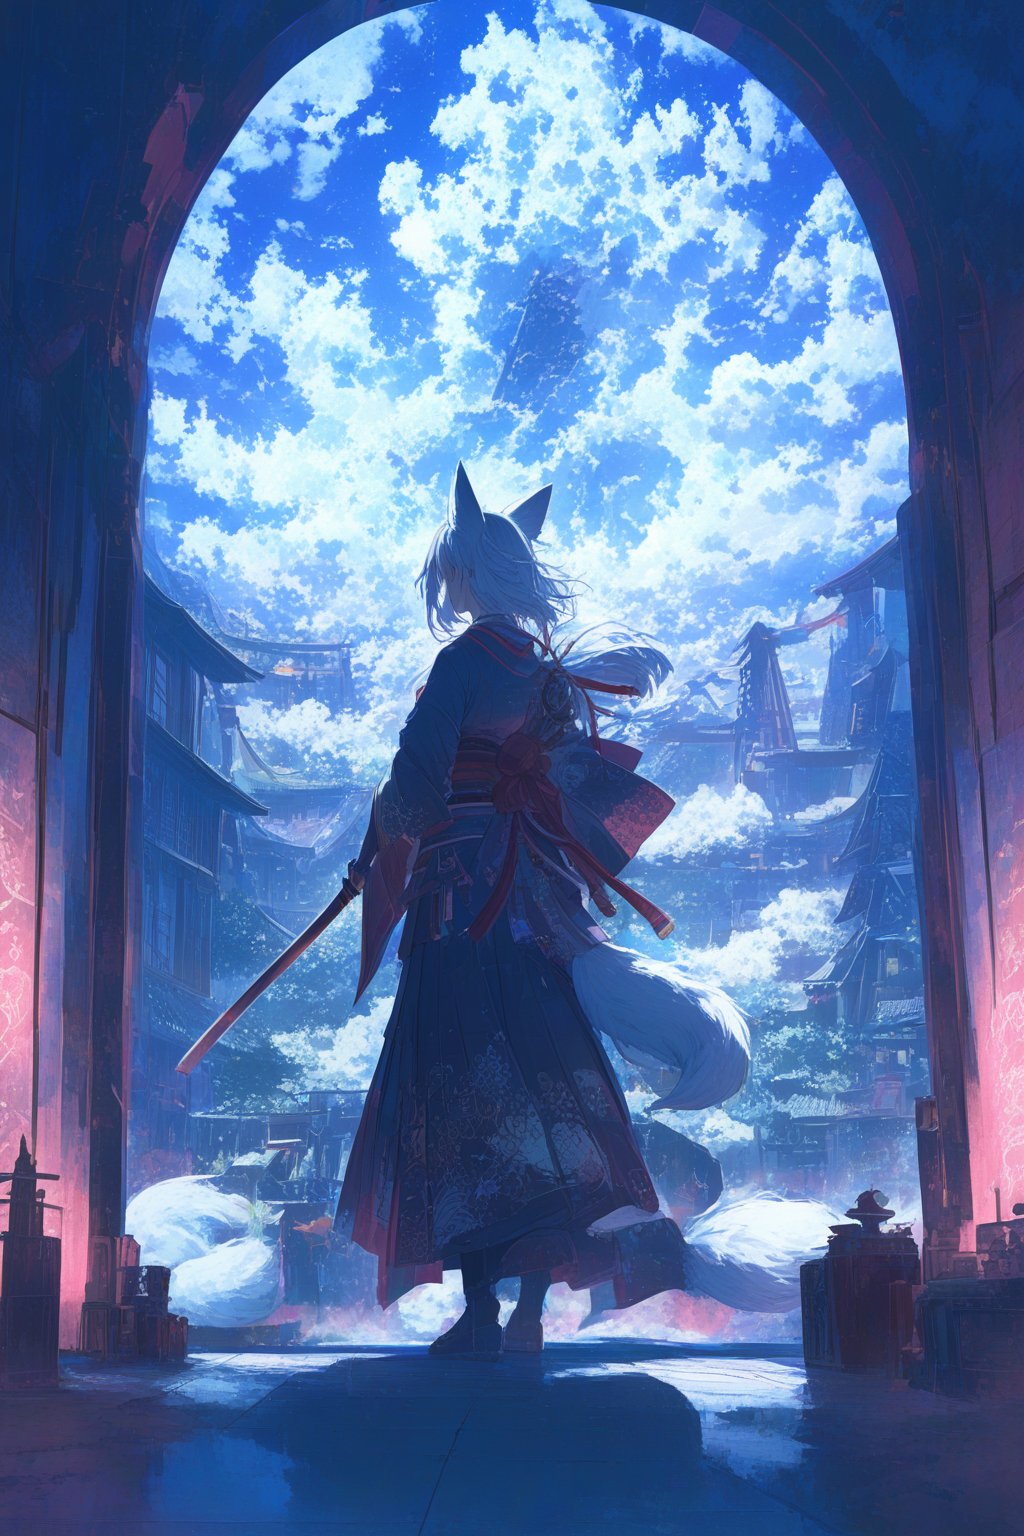 Official Art, Unity 8K Wallpaper, Extreme Detailed, Beautiful and Aesthetic, Masterpiece, Top Quality, perfect anatomy, a beautifully drawn (((ink illustration))) depicting, integrating elements of calligraphy, vintage, red and indigo accents, watercolor painting, concept art, (best illustration), (best shadow), Analog Color Theme, vivid colours, contrast, smooth, sharp focus, scenery,

A dazzling kitsune, a mystical fox spirit in Japanese folklore, is depicted in an atmospheric neo-noir photograph. This captivating image showcases the kitsune's sleek, silver fur shimmering under the dim light, its multiple tails swirling with an otherworldly energy. The piercing red eyes exude both wisdom and danger, radiating a sense of ancient power. The background is a hazy cityscape bathed in neon lights, adding to the surreal and mysterious feel of the scene. The high-definition detail and expert composition make this image a true masterpiece, drawing viewers into a world where the fantastical and the modern collide.................,more detail XL,(Pencil_Sketch:1.2, messy lines,Ukiyo-e,ink,colorful,niji6,samurai,shogun,katana,tanto,amaterasu,scene